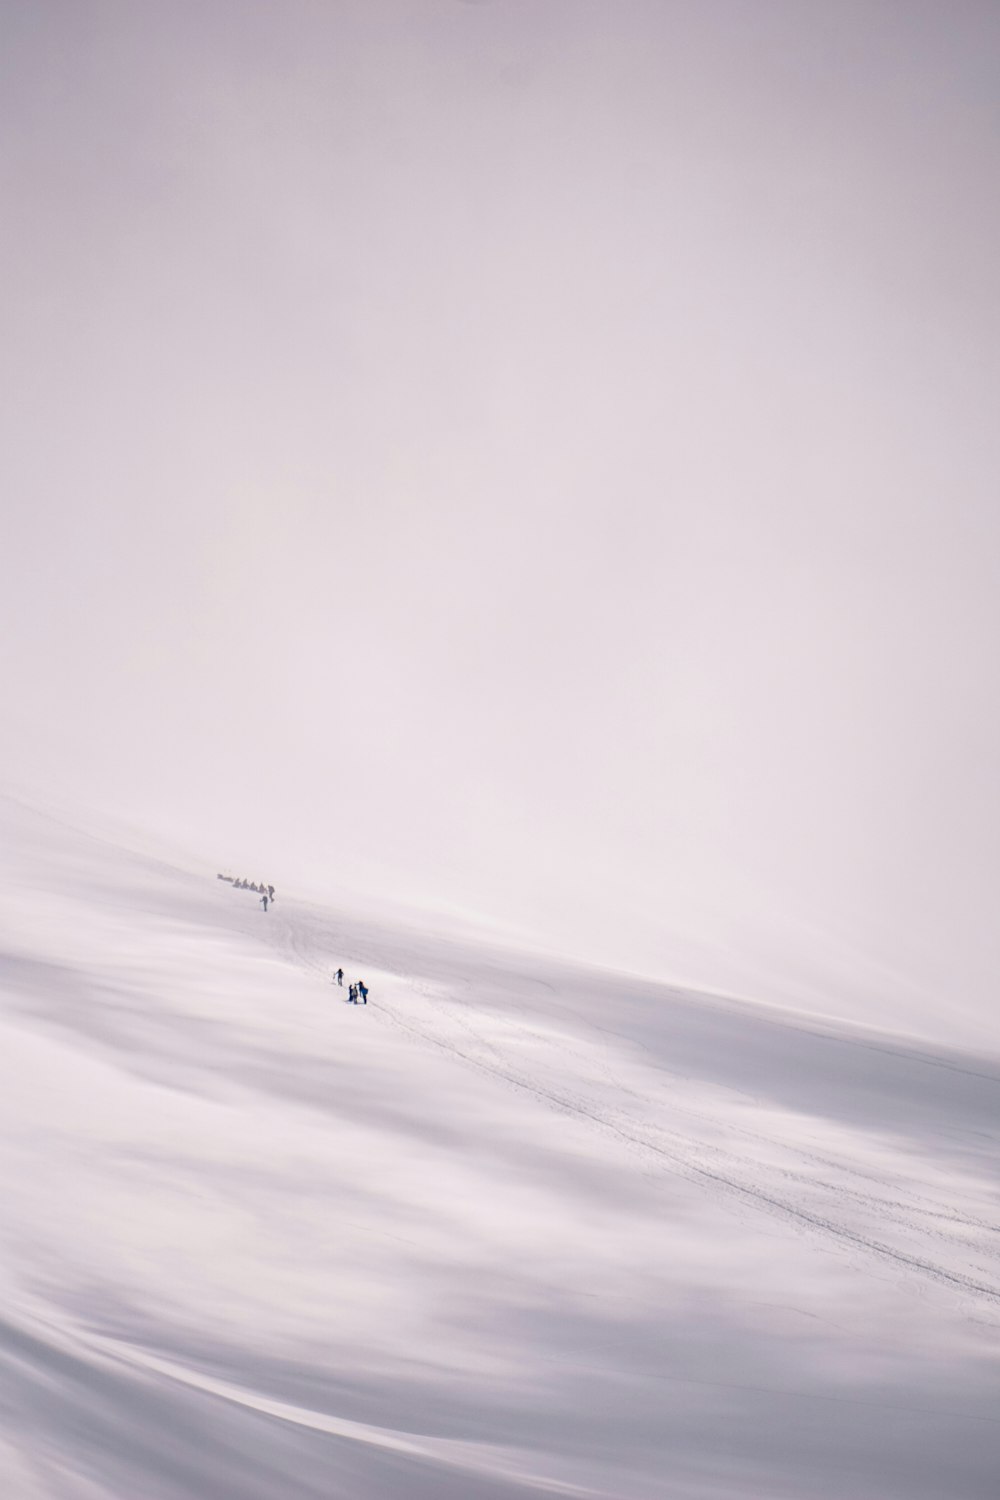 person in black jacket walking on white snow covered field during daytime